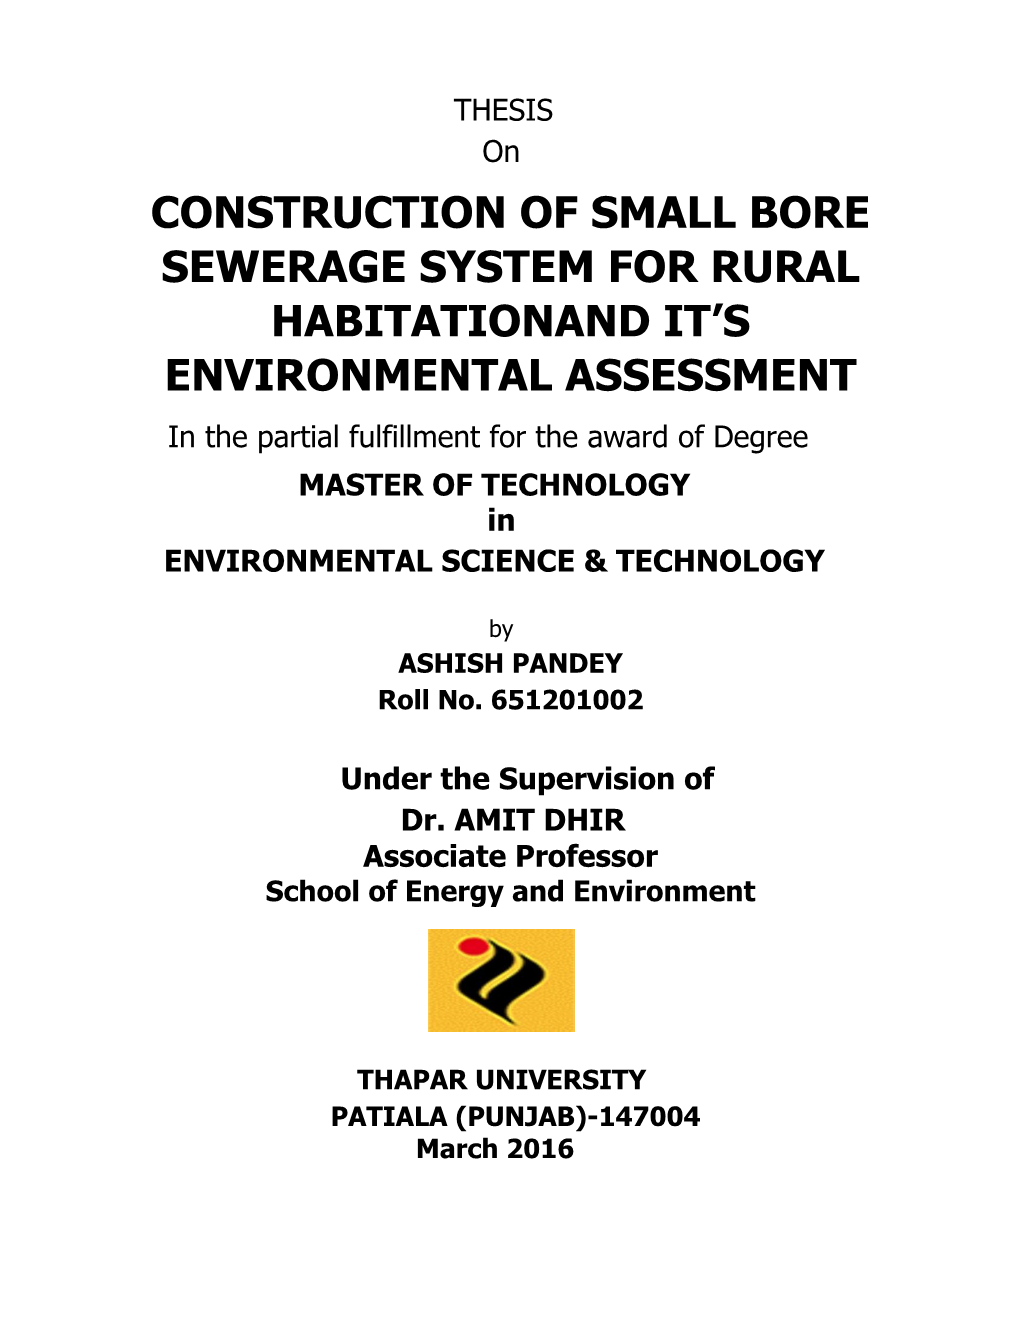 Construction of Small Bore Sewerage System for Rural Habitationand It’S